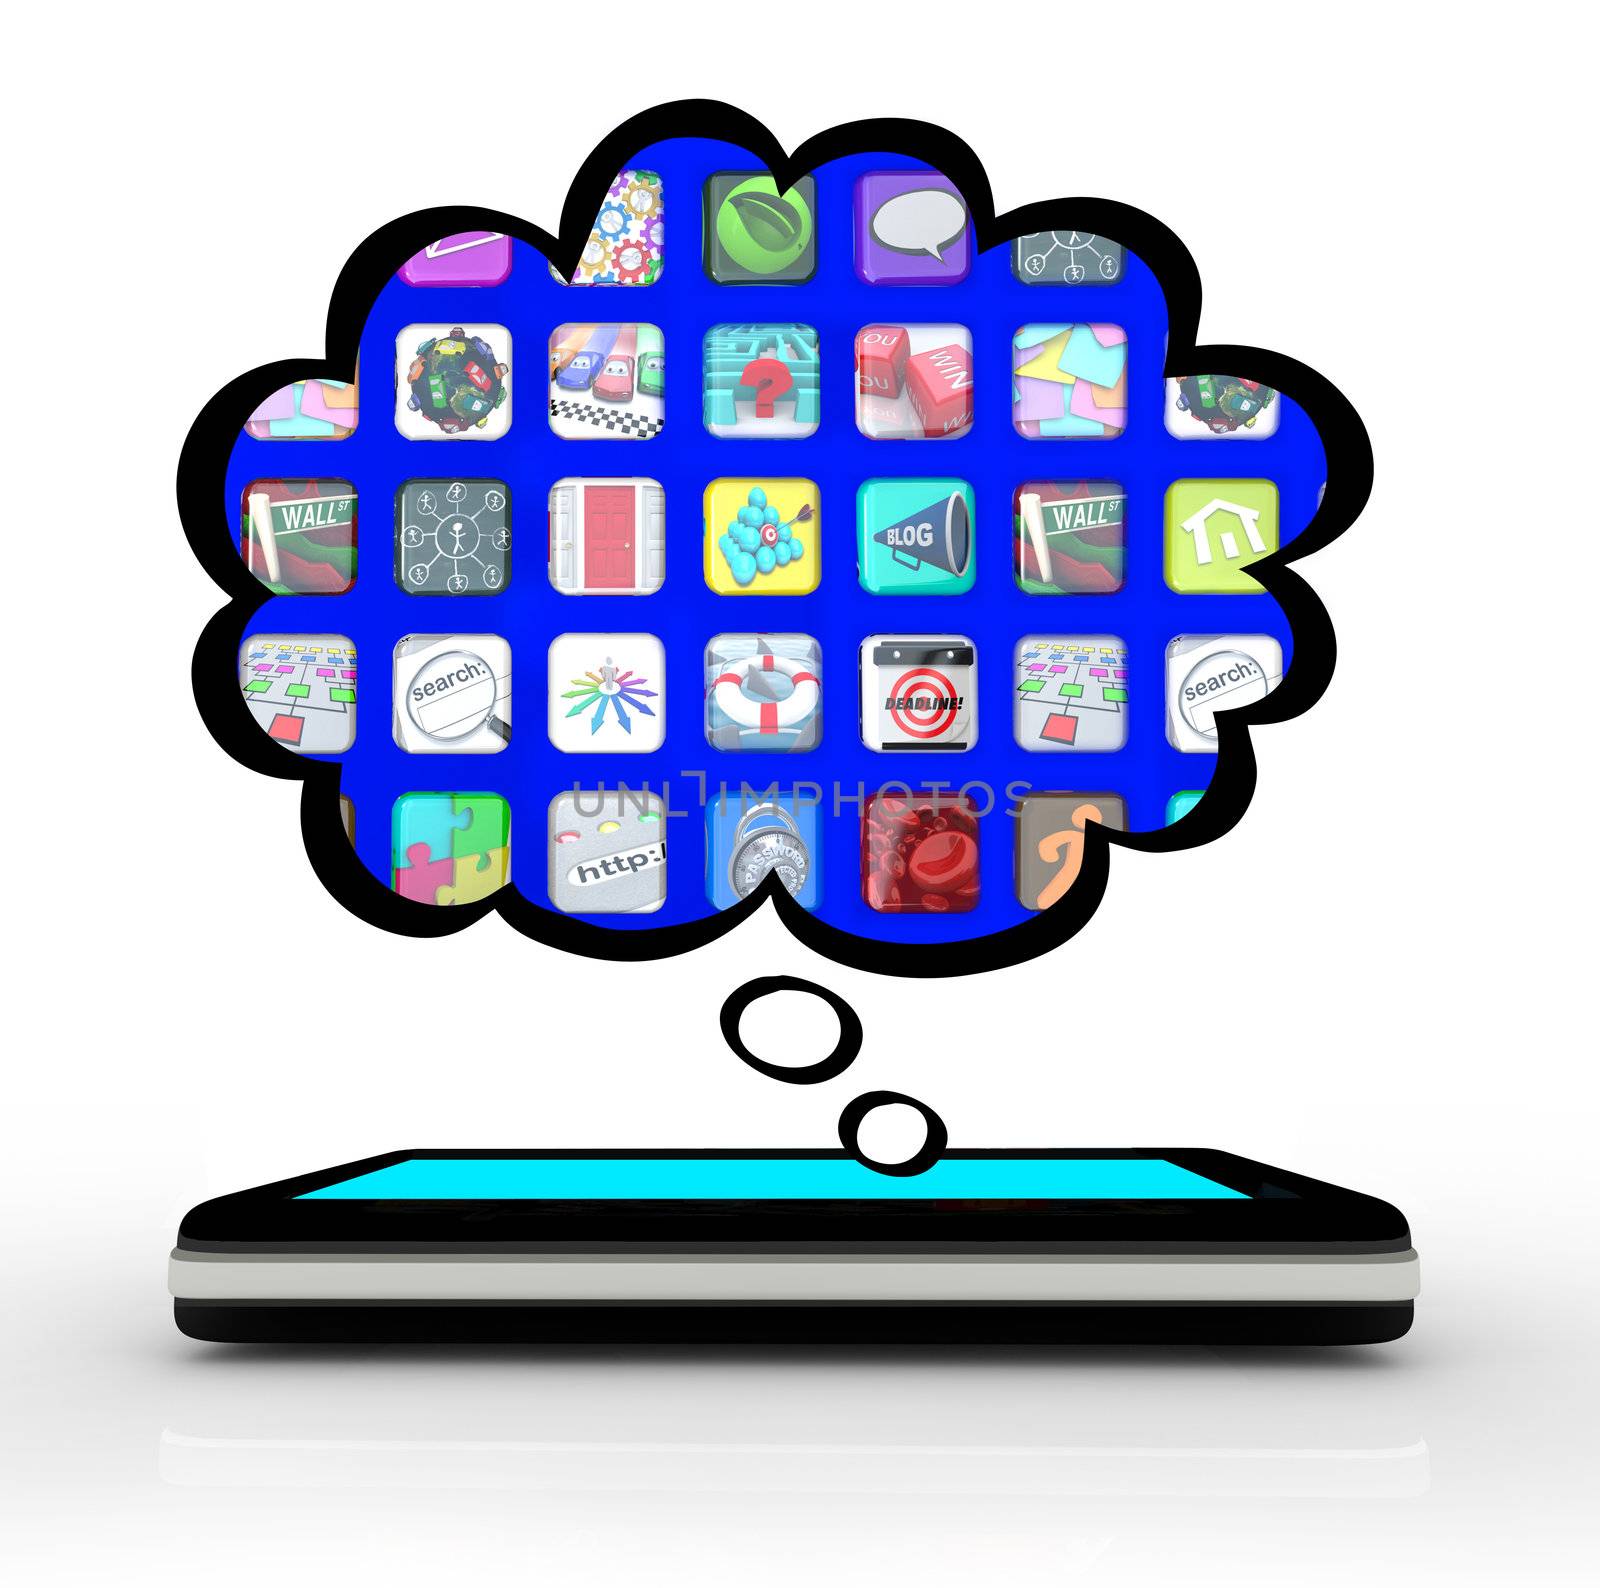 Smart Phone Thinking of Apps Software Thought Cloud by iQoncept